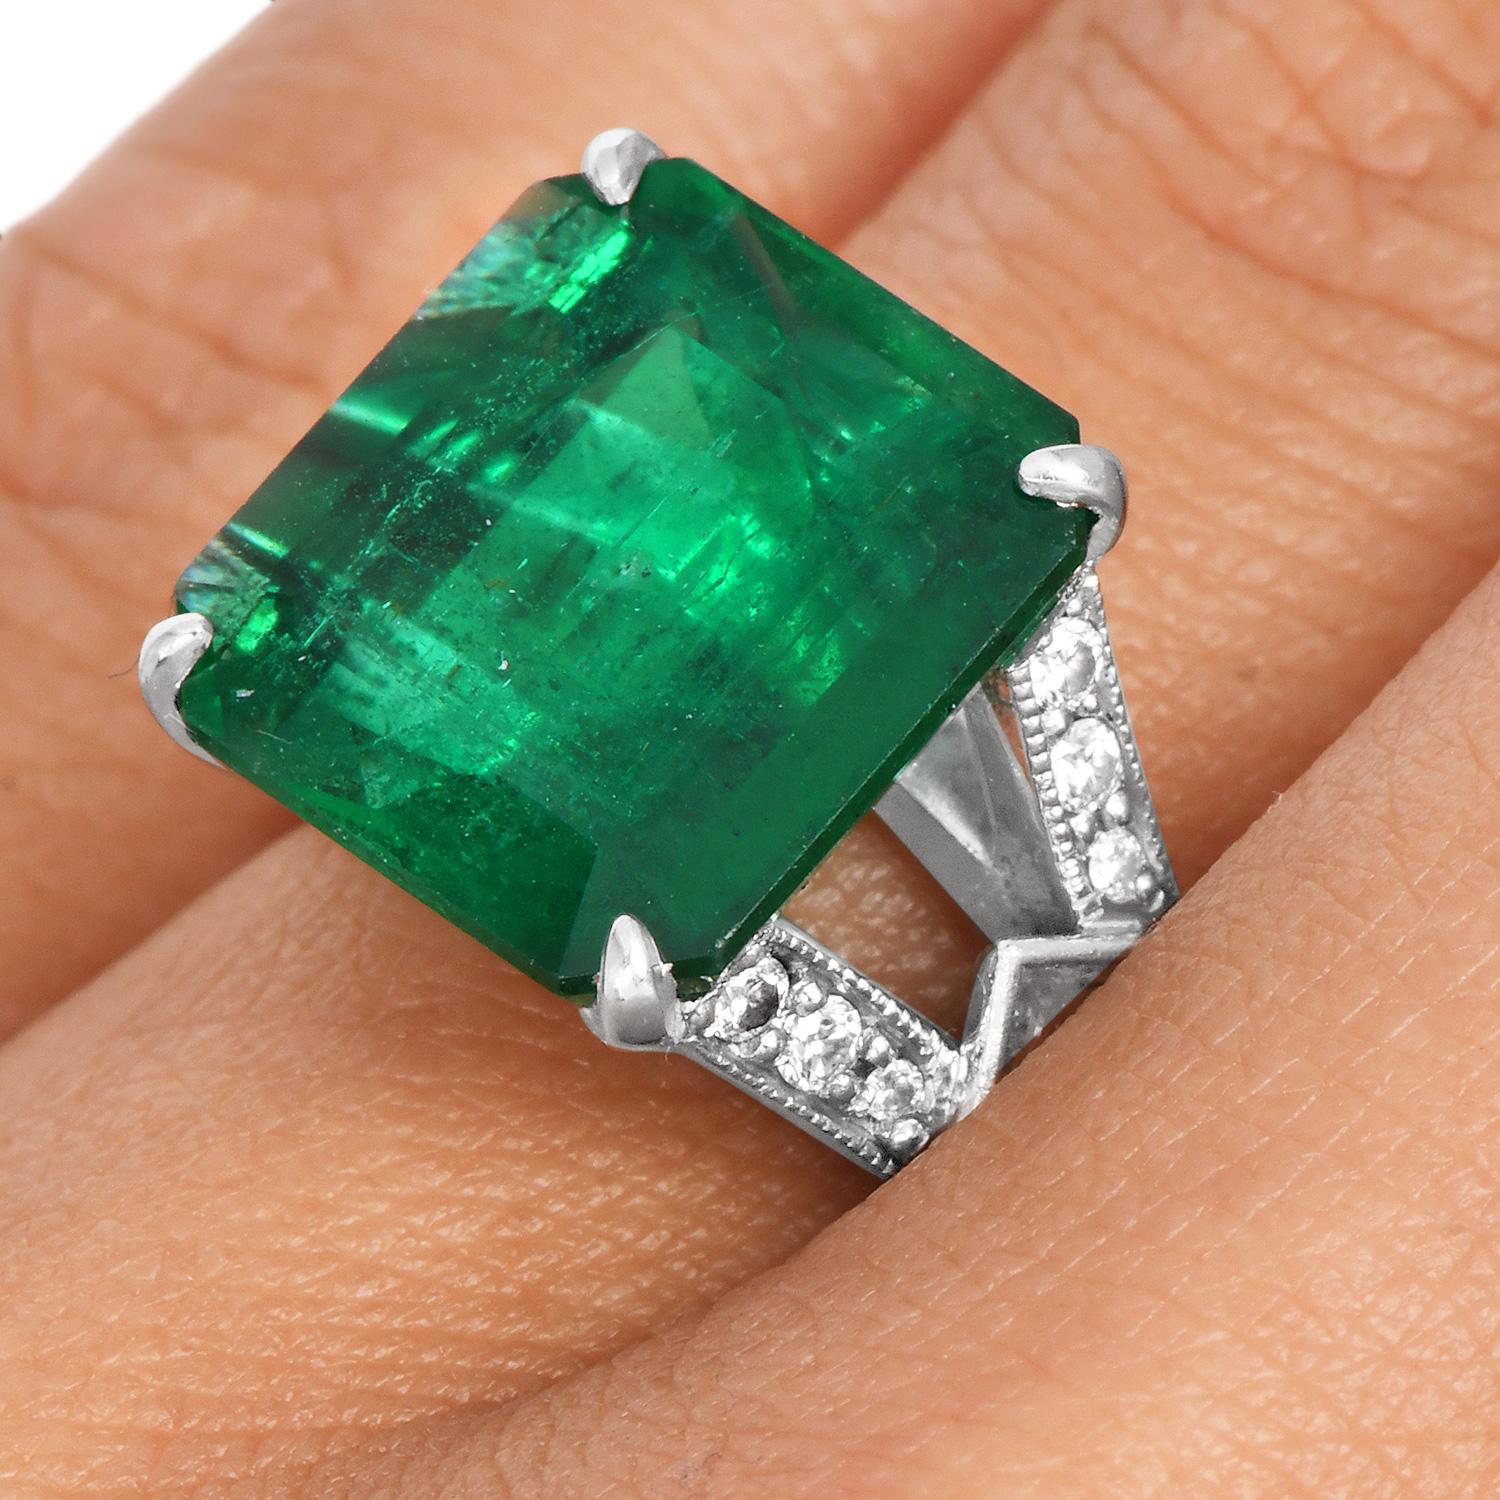 Treat yourself to this irresistibly stunning 5.93 carat emerald diamond platinum ring! 

Crafted in platinum with the center deep green emerald of approximately 5.93 carats. The vivid, and transparent hue of the emerald is complimented with two